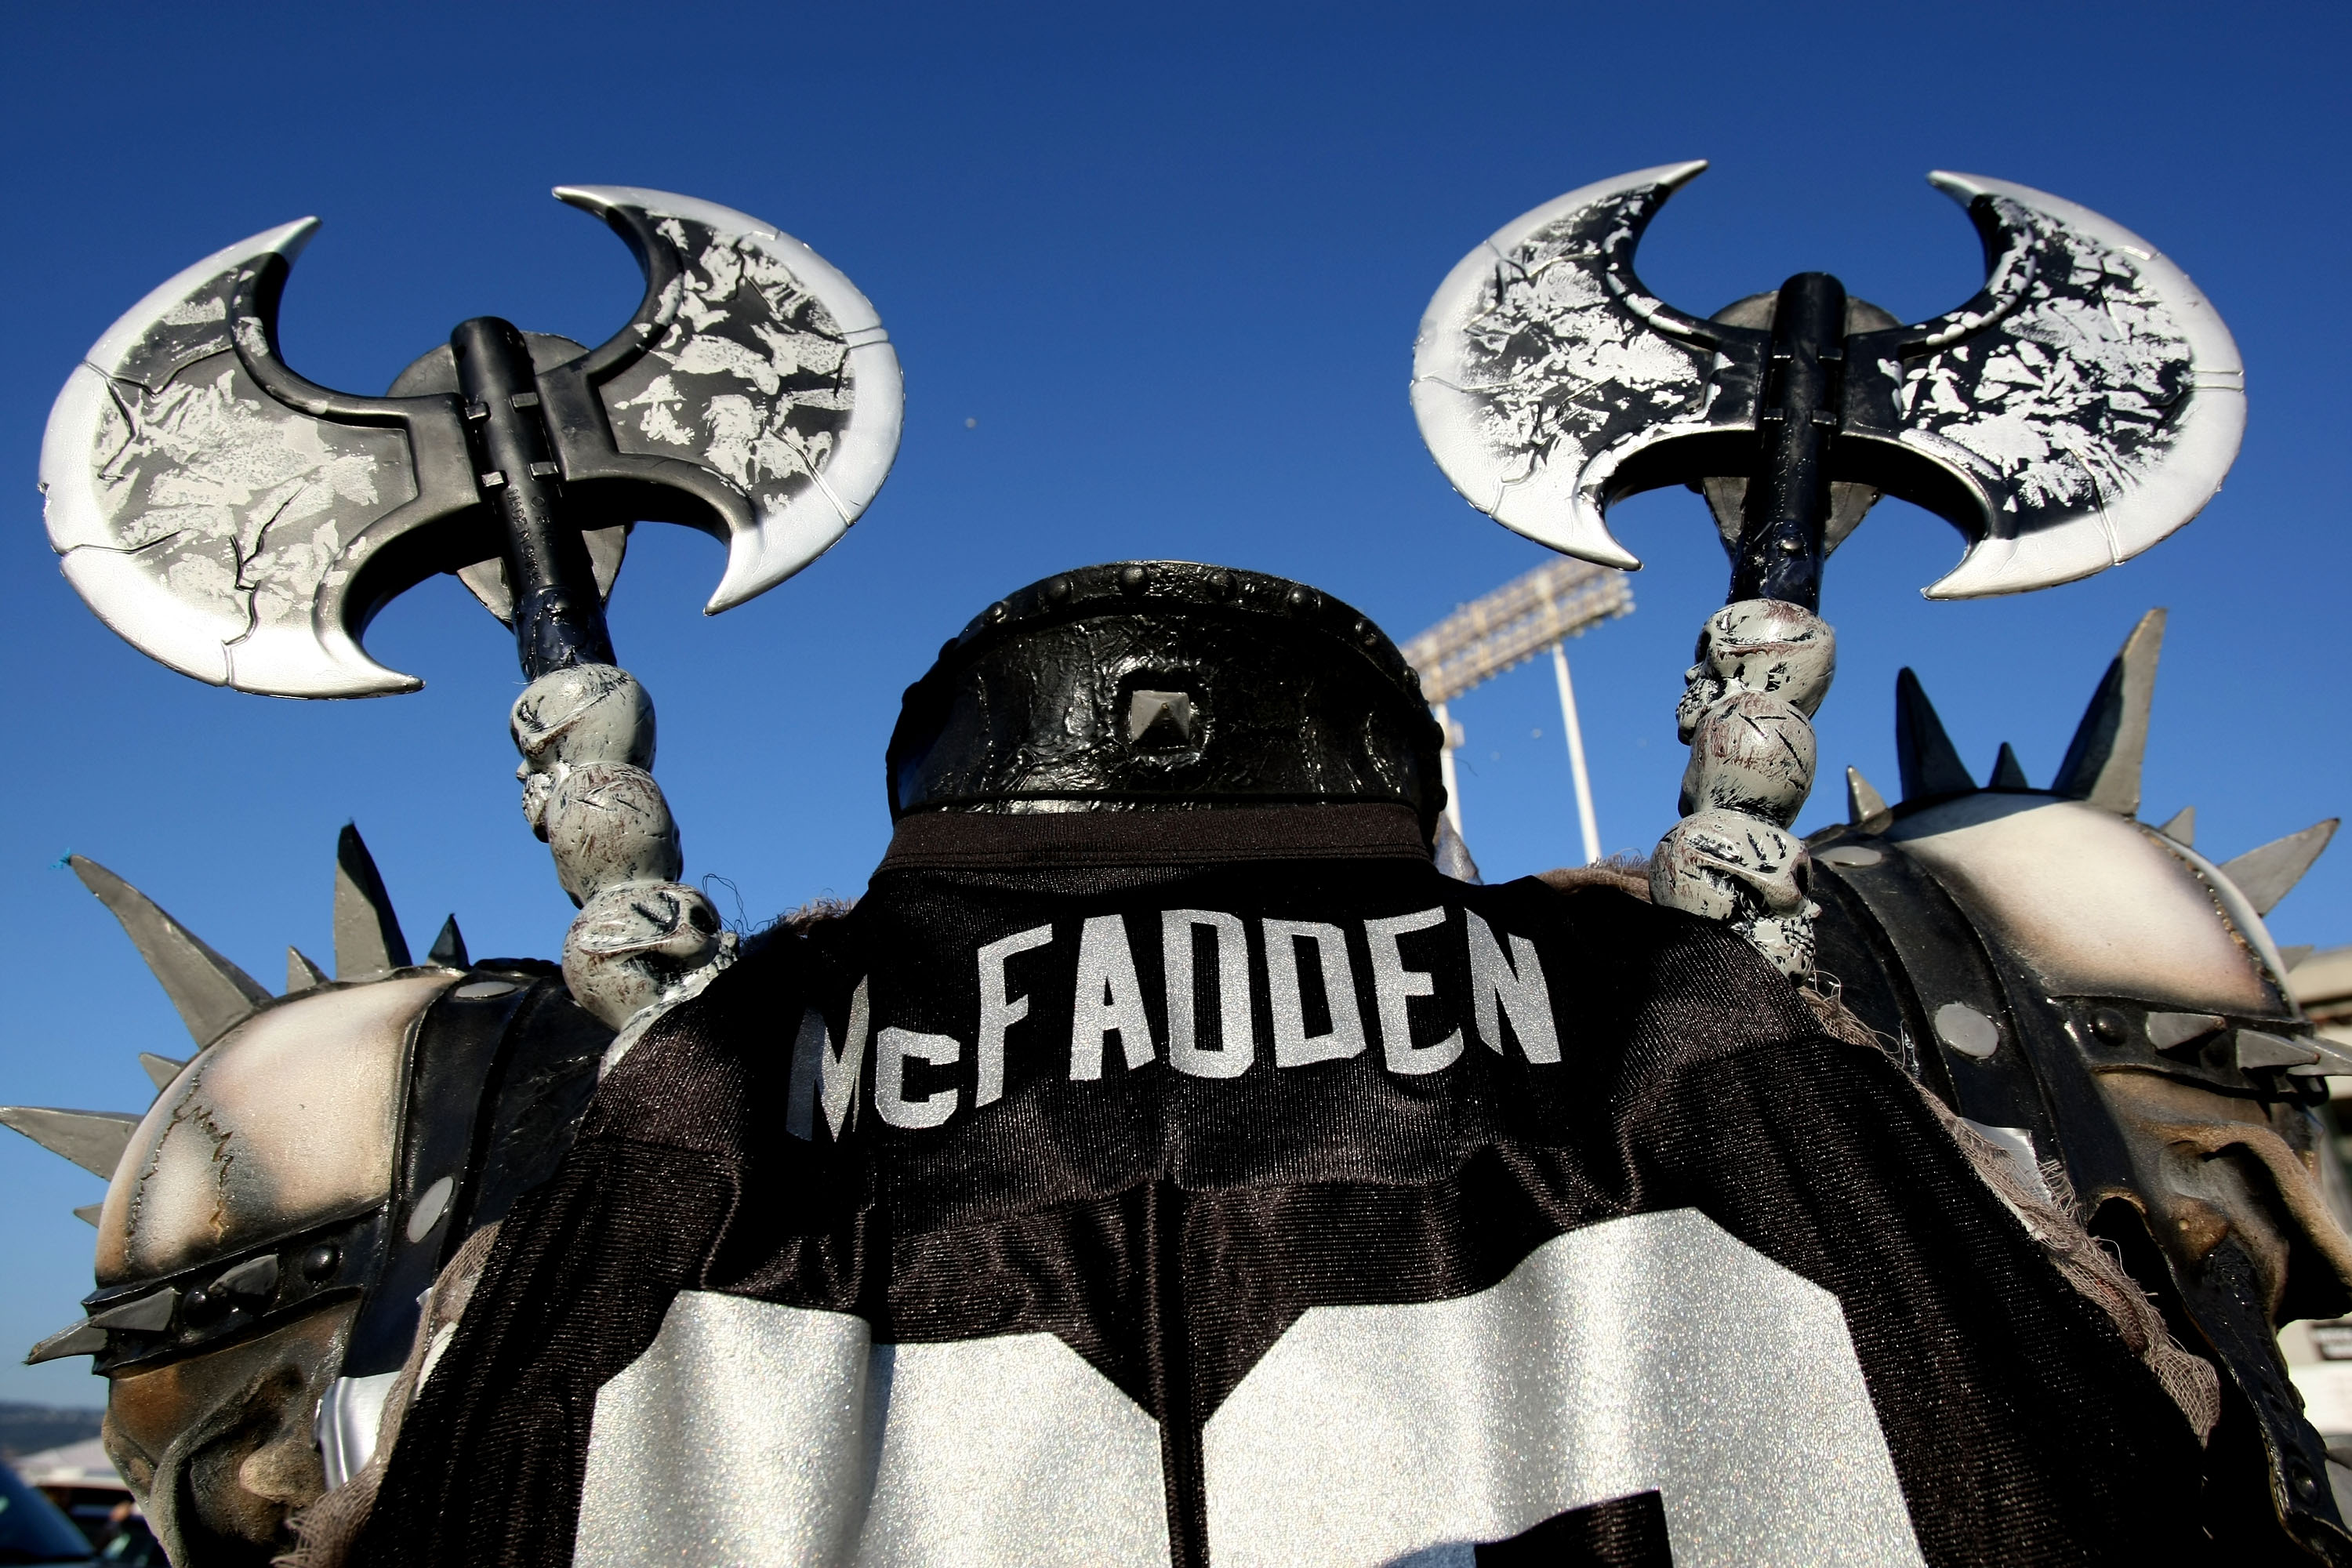 OAKLAND, CA - SEPTEMBER 08:  An Oakland Raider fan walks around the stadium before the Denver Broncos and the Oakland Raiders NFL game at McAfee Coliseum on September 8, 2008 in Oakland, California.  (Photo by Jed Jacobsohn/Getty Images)